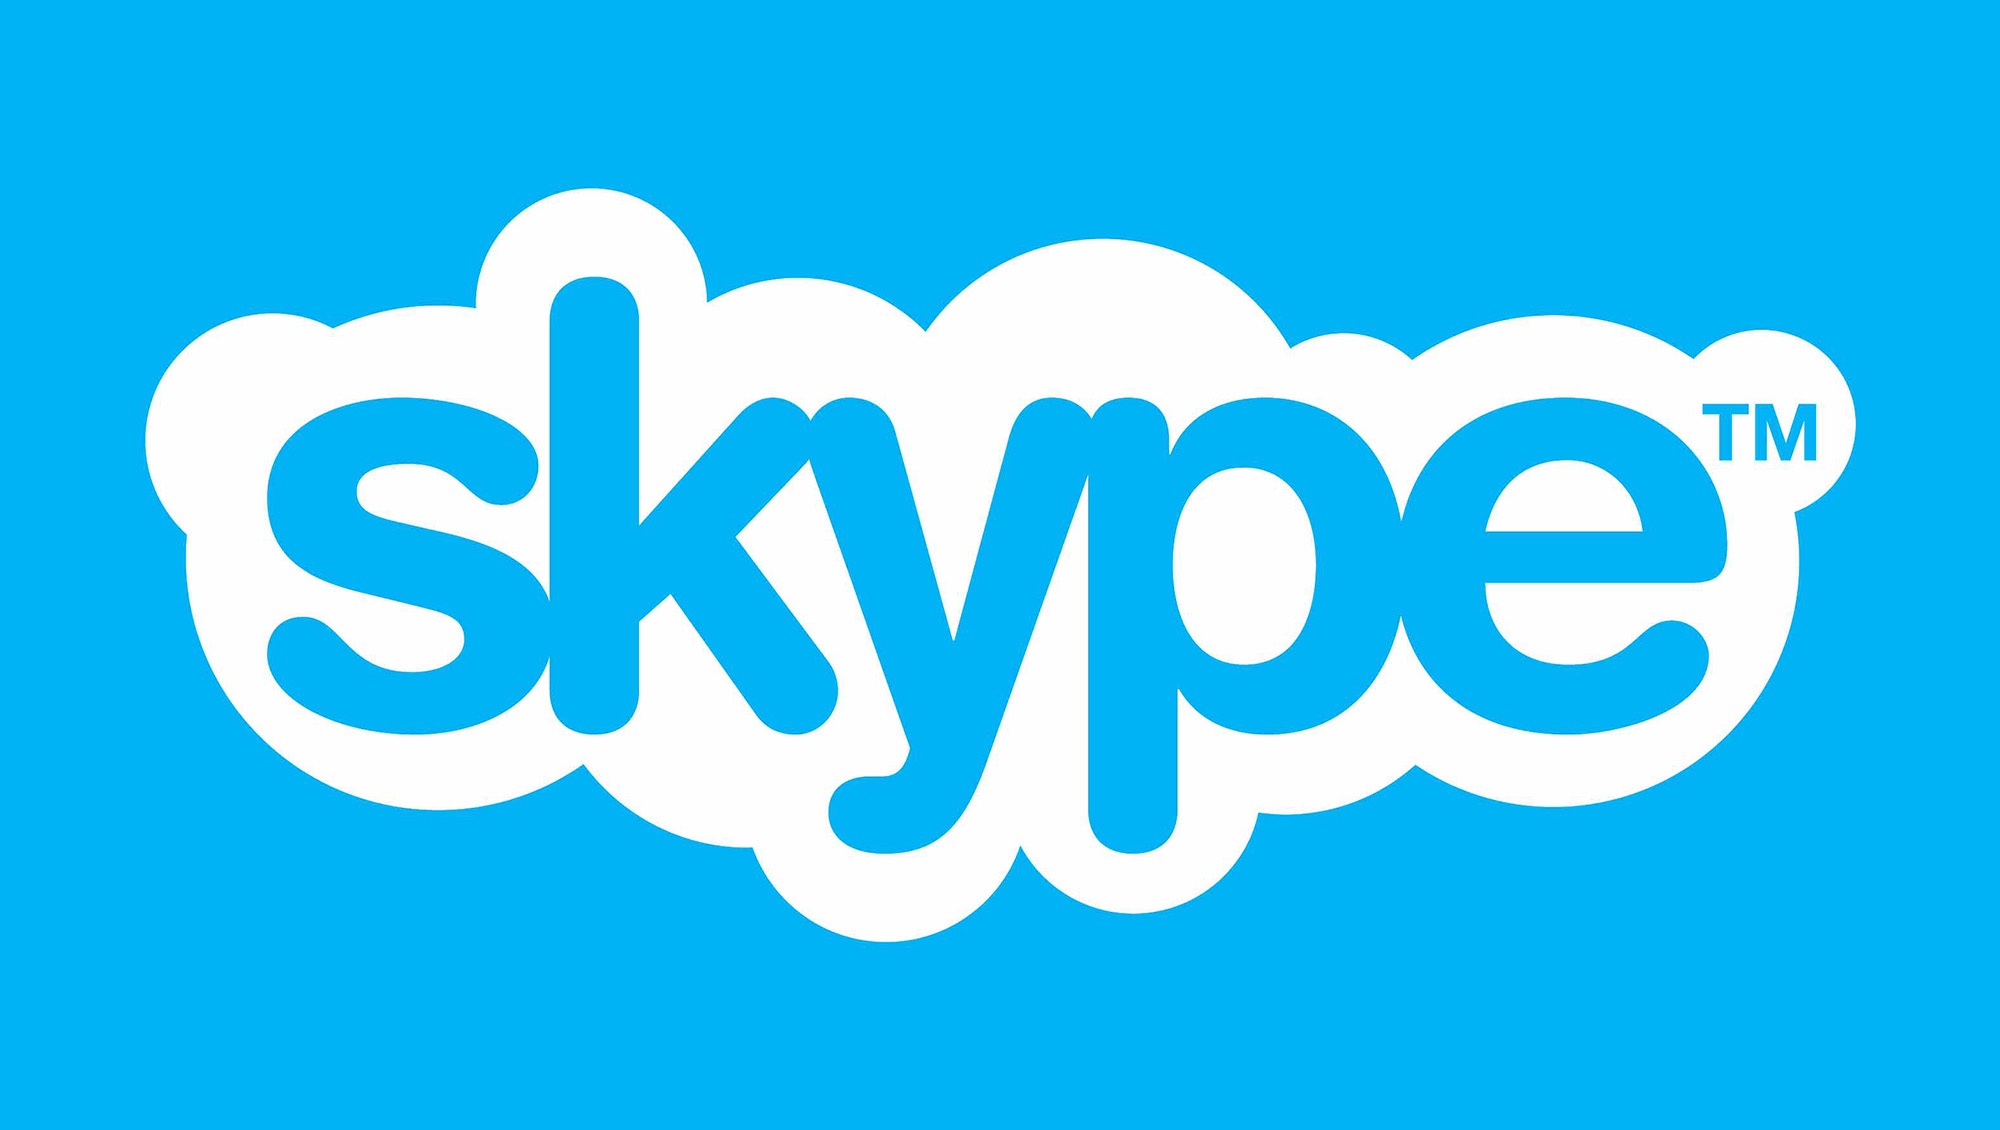 Gay sex chats are prohibited on Skype